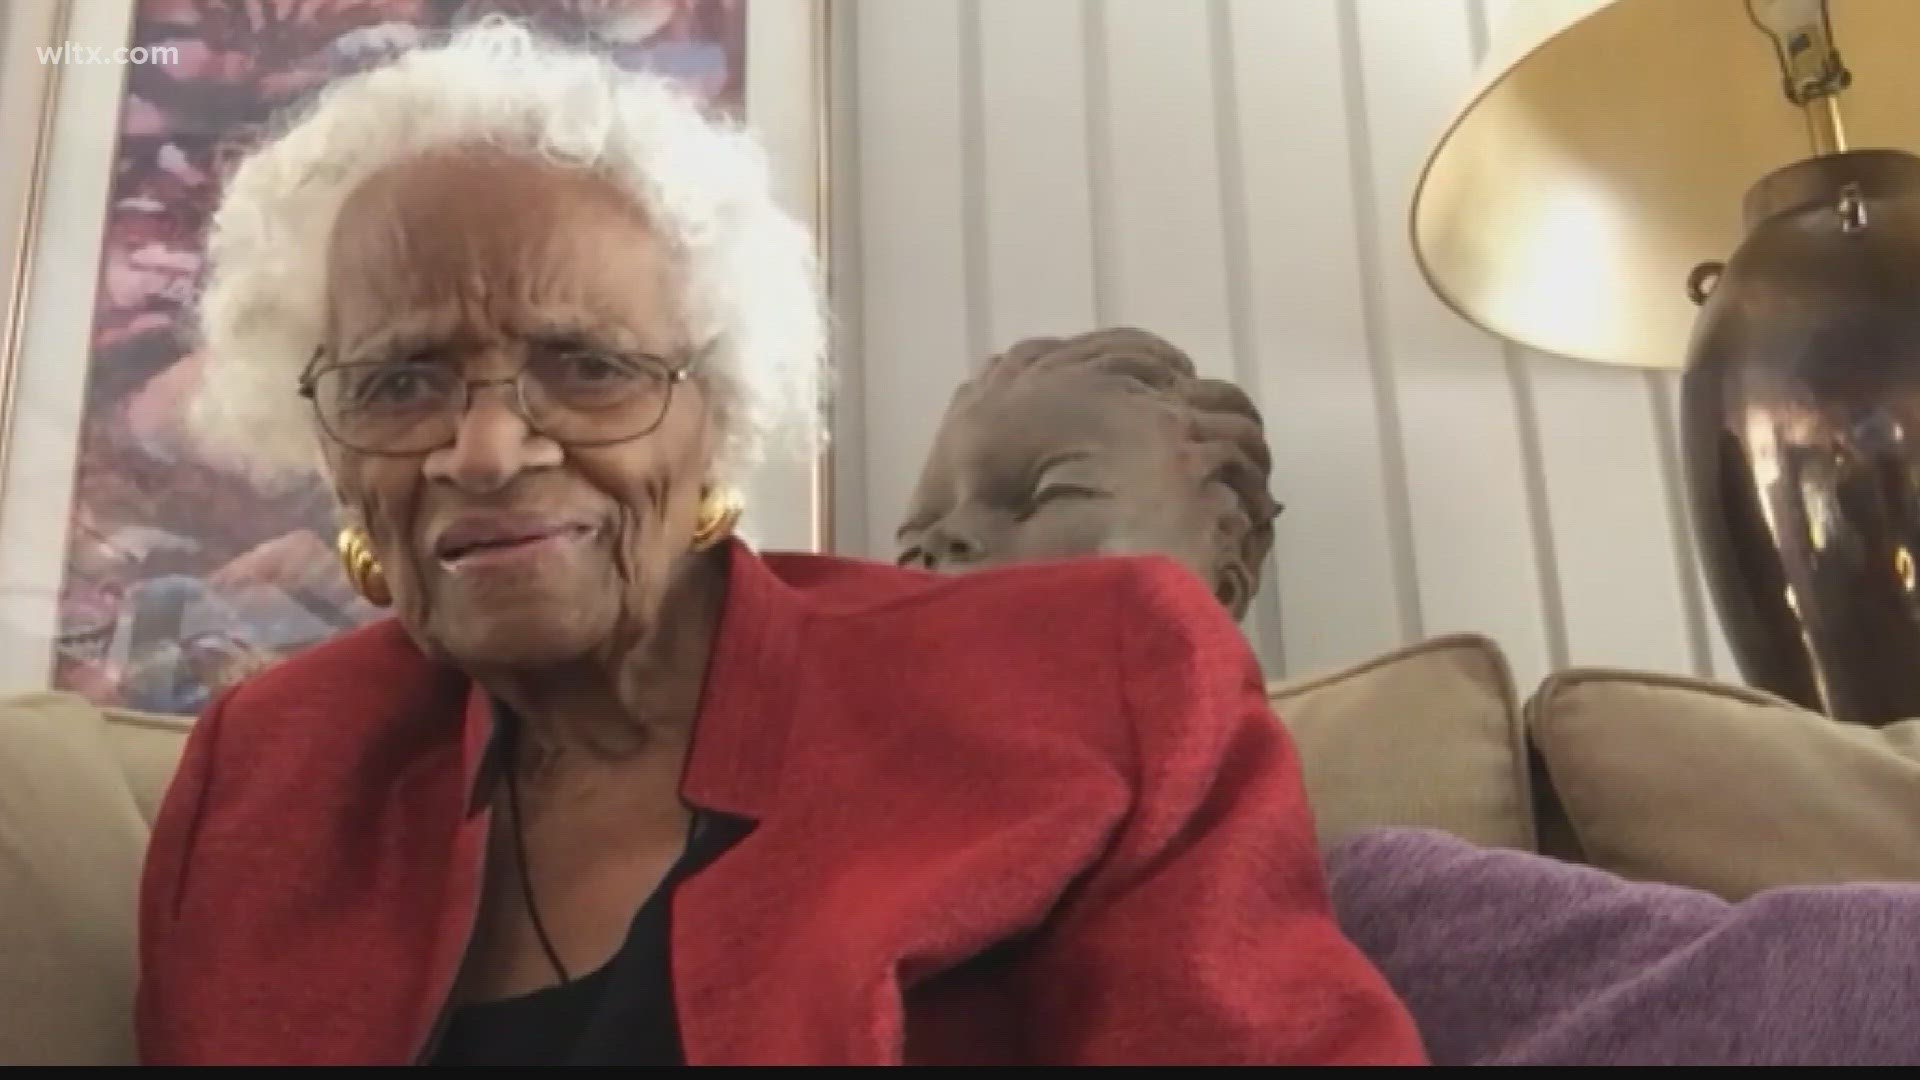 Elise Jones Martin, who was a trailblazer in Columbia in business and community service, has died at the age of 108.